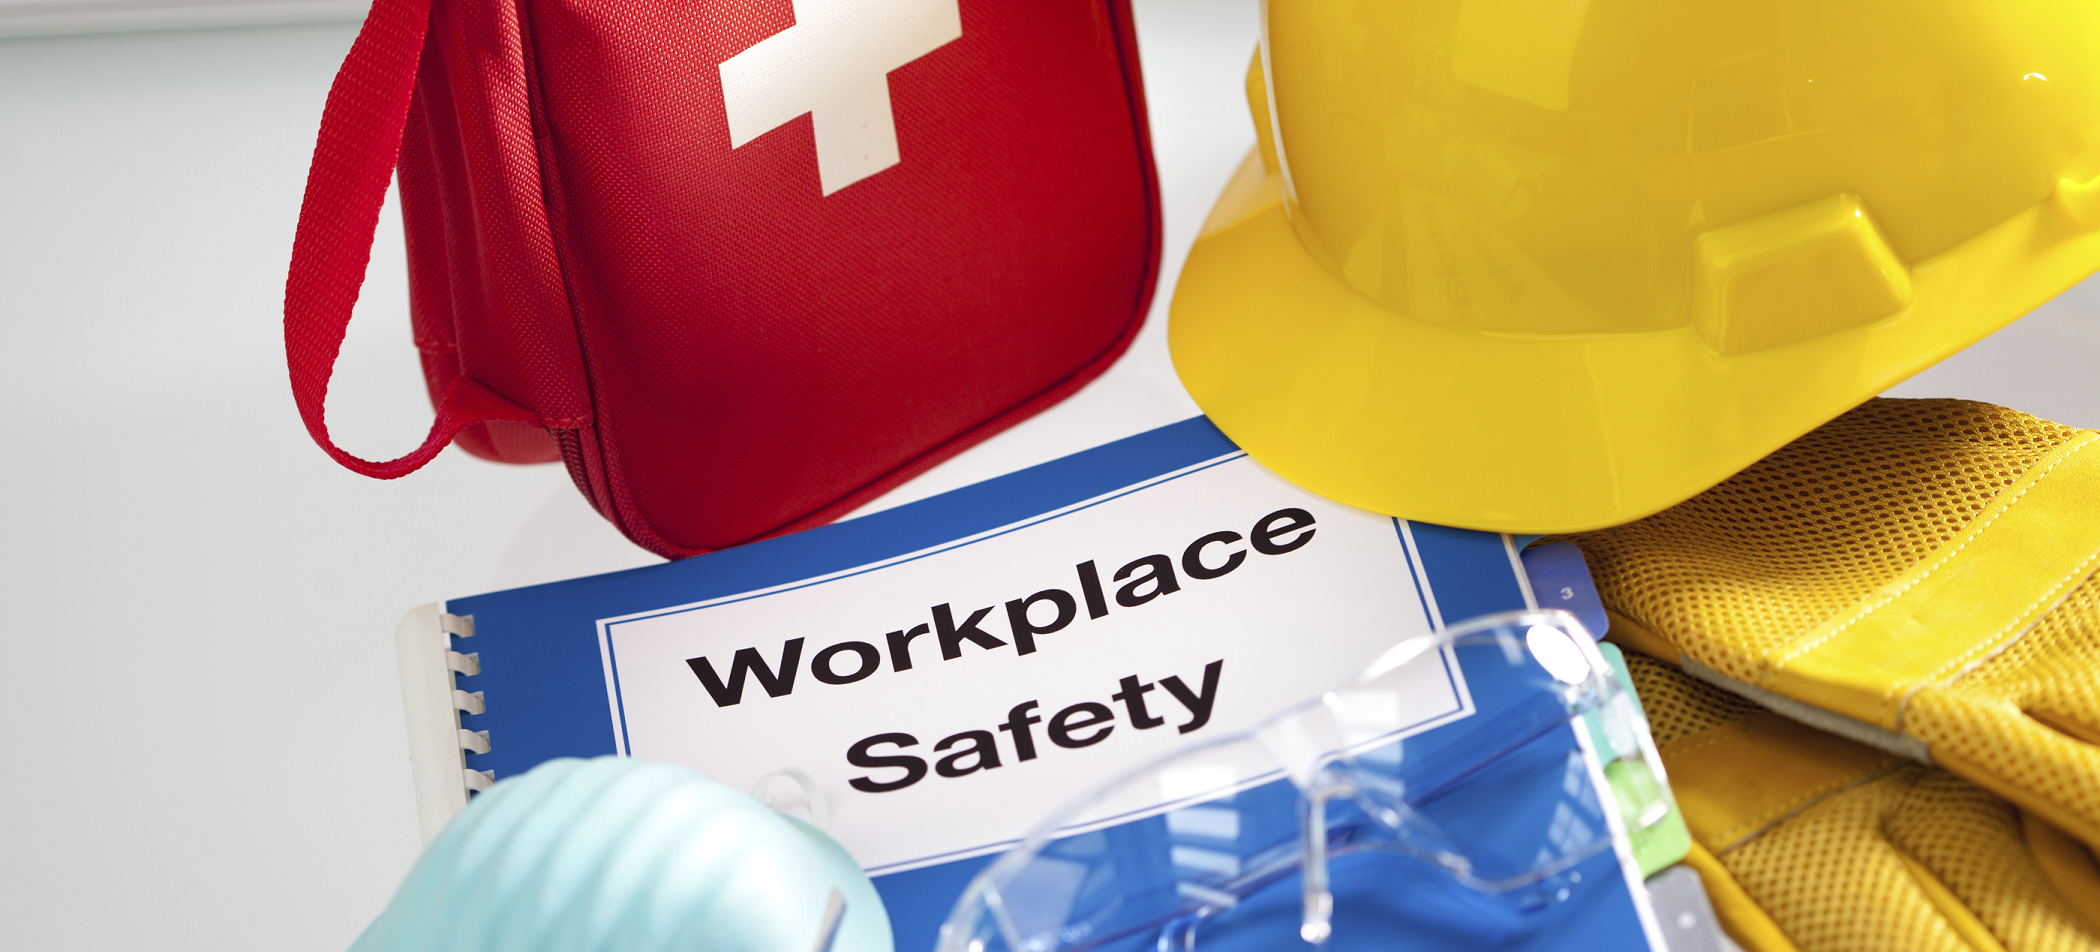 Workplace safety booklet, first aid kit, hard hat, gloves and mask - safety solutions